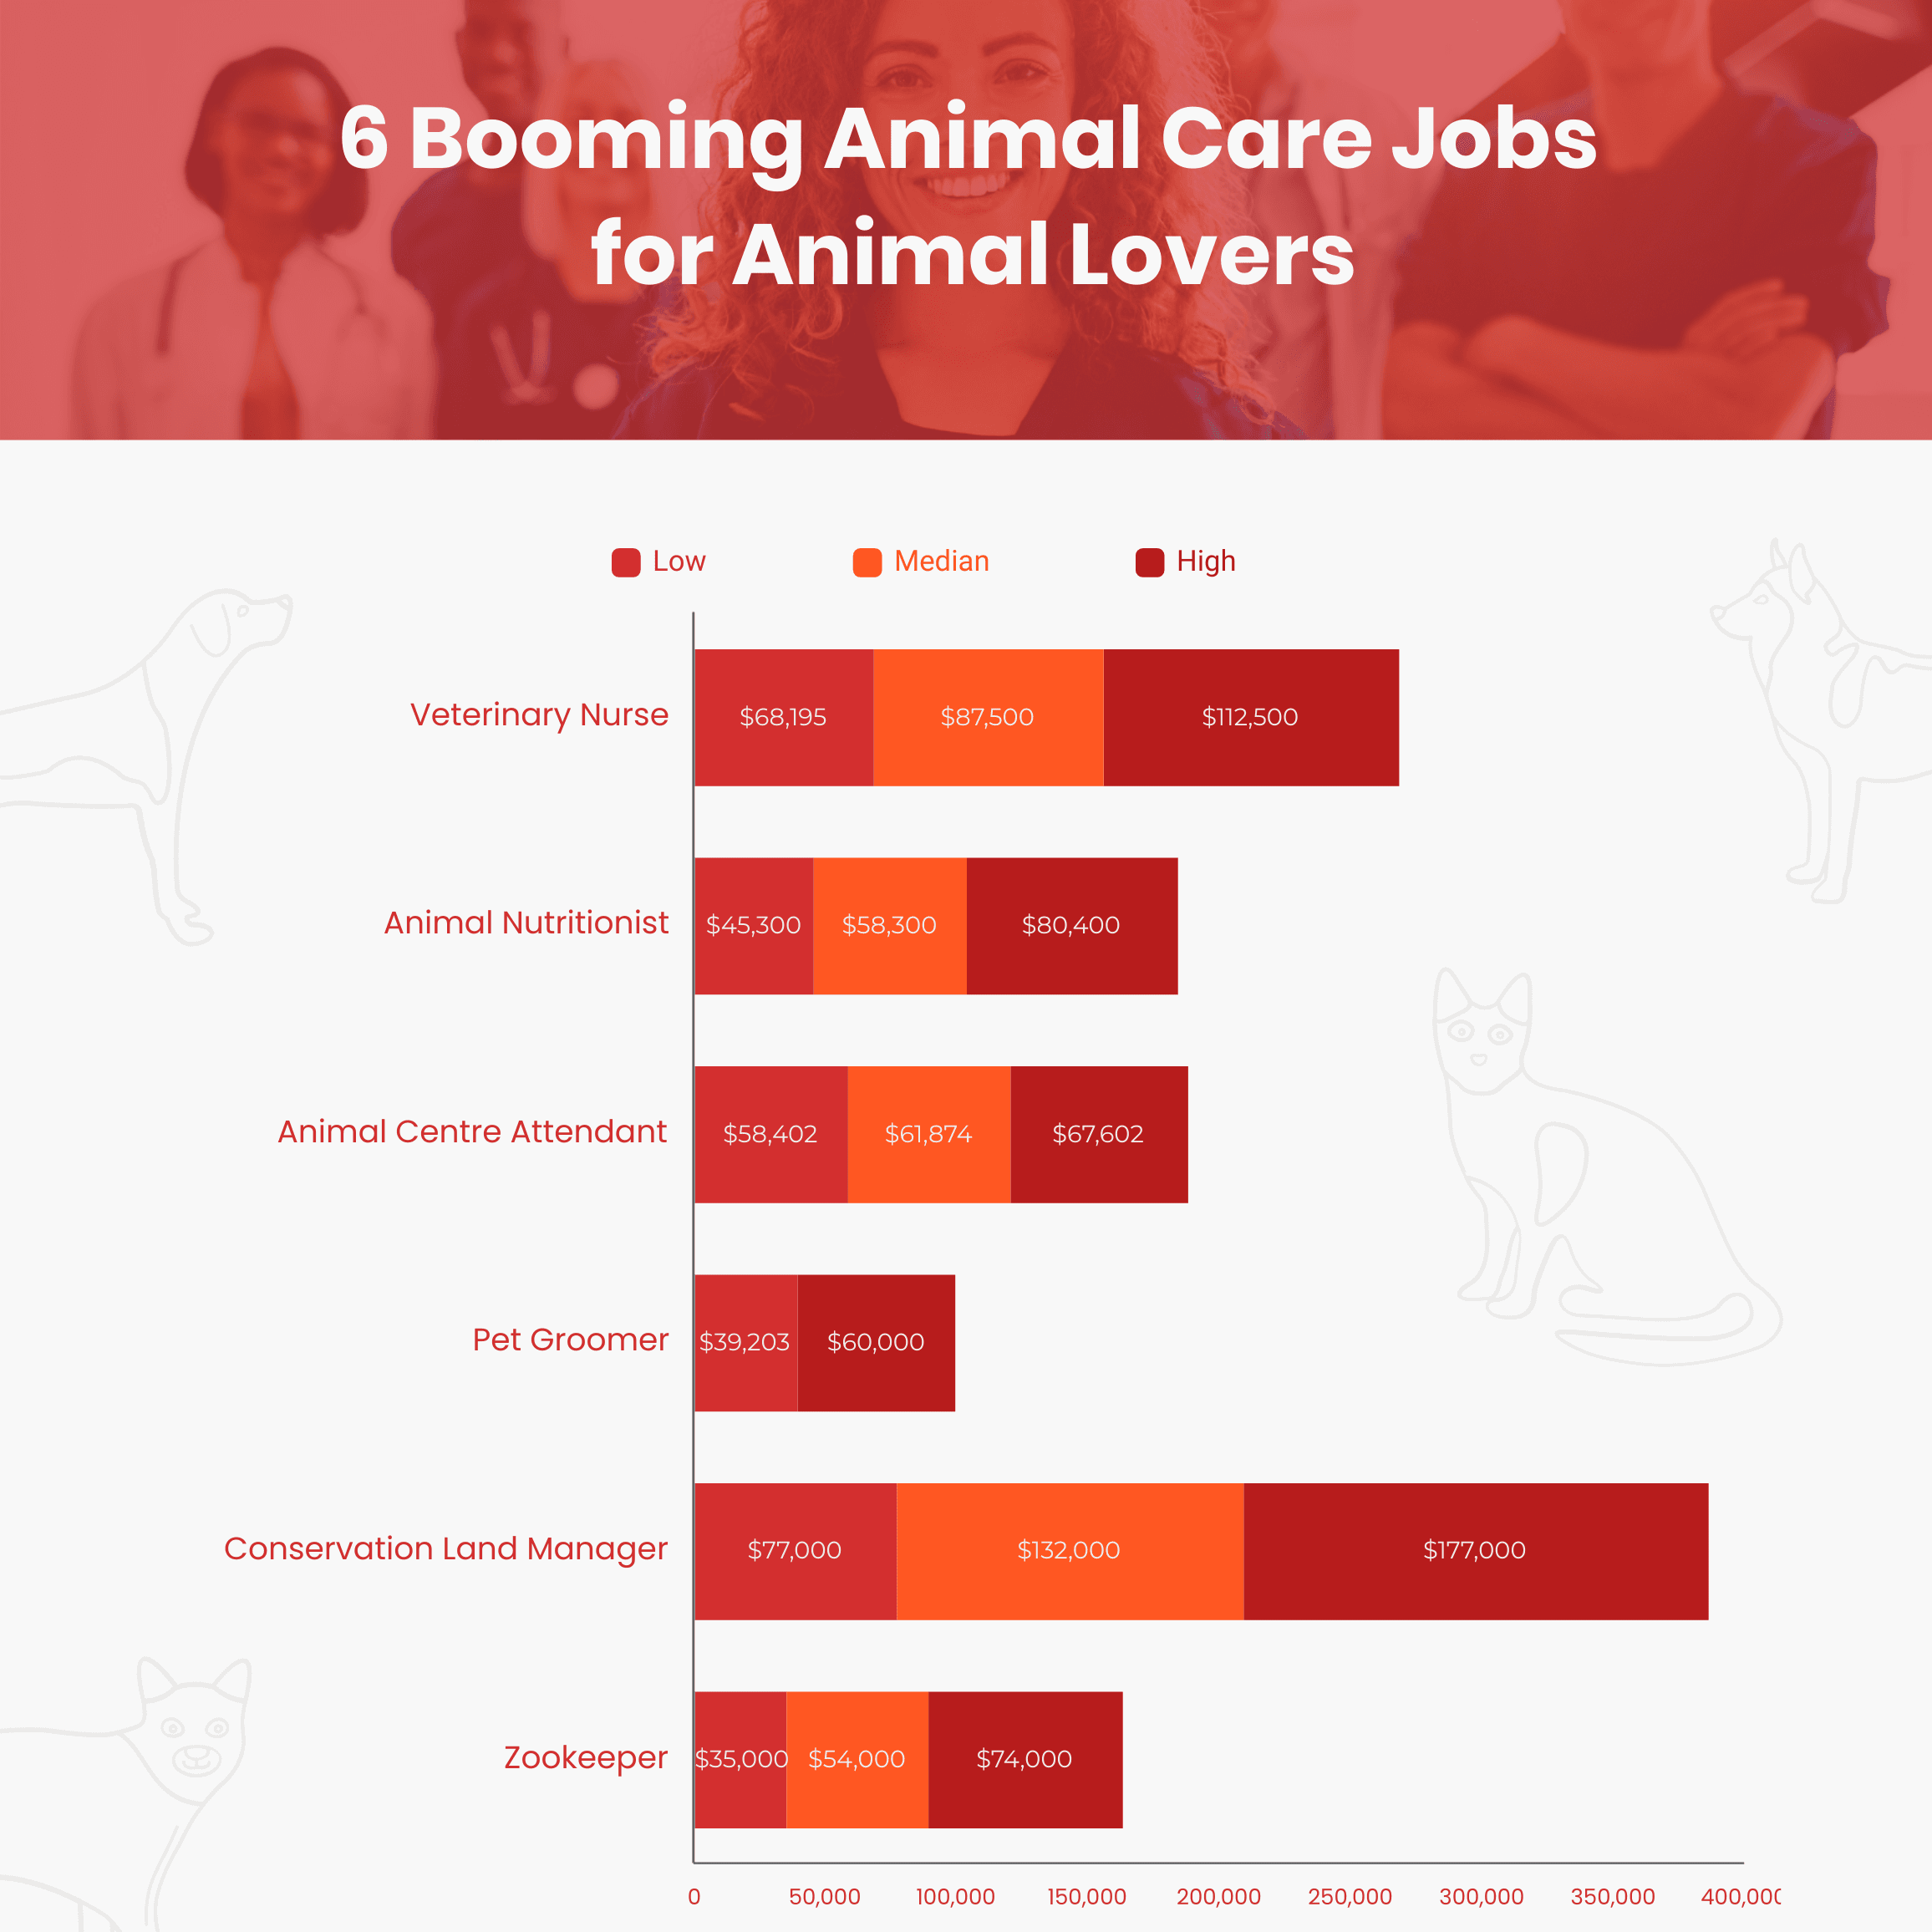 6 Booming Animal Care Jobs for Animal Lovers 